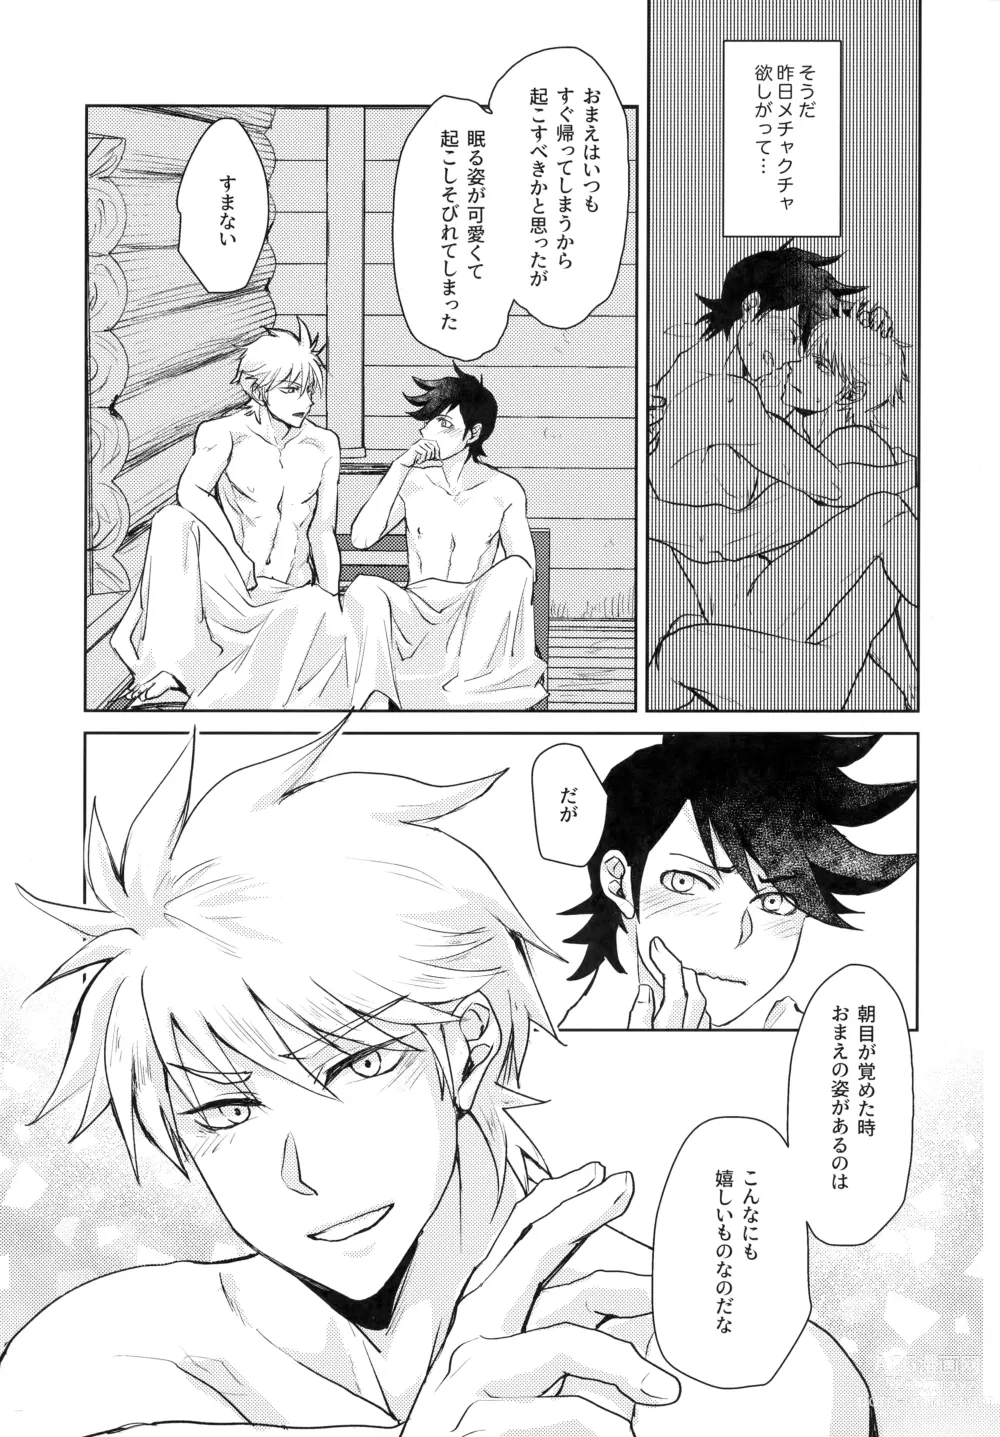 Page 22 of doujinshi You Complete Me!